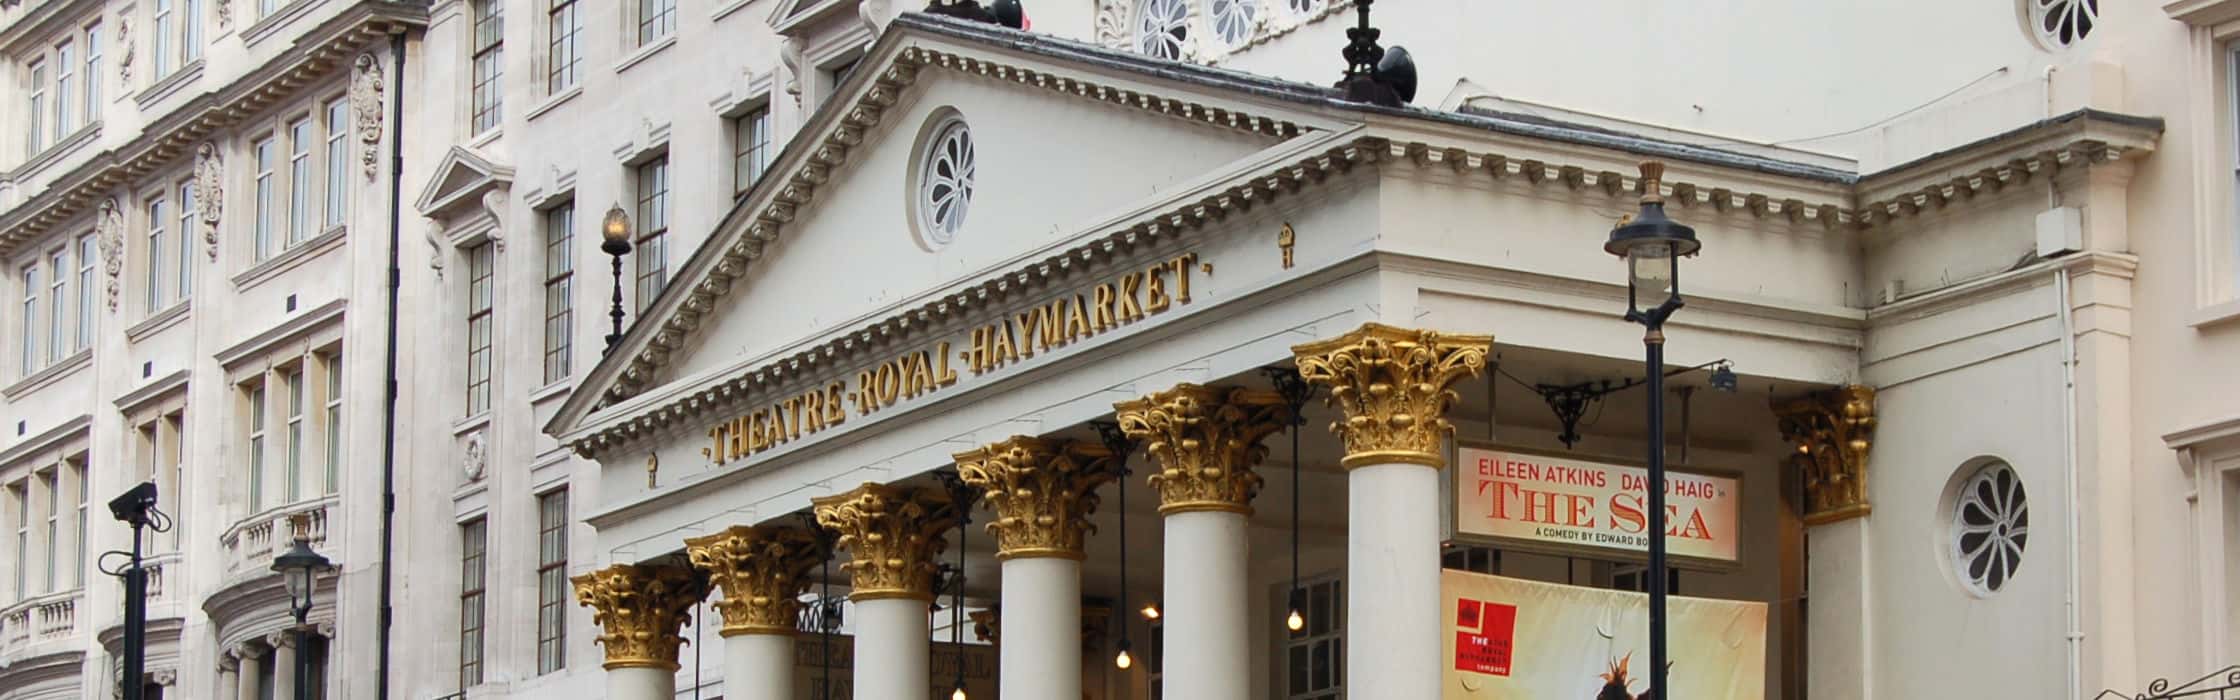 What's On at Theatre Royal Haymarket, London